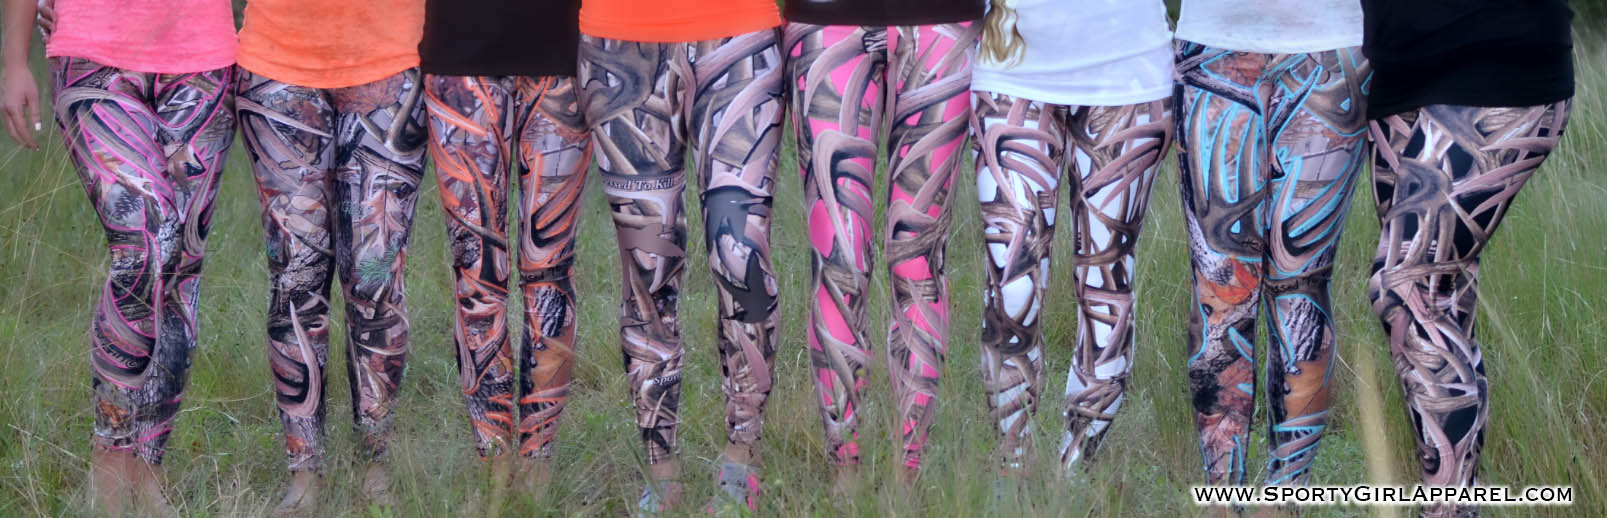 https://cdn10.bigcommerce.com/s-90gulf/product_images/uploaded_images/sporty-girl-apparel-leggings-mint-orange-and-pink-camo-pants.jpg?t=1476823174